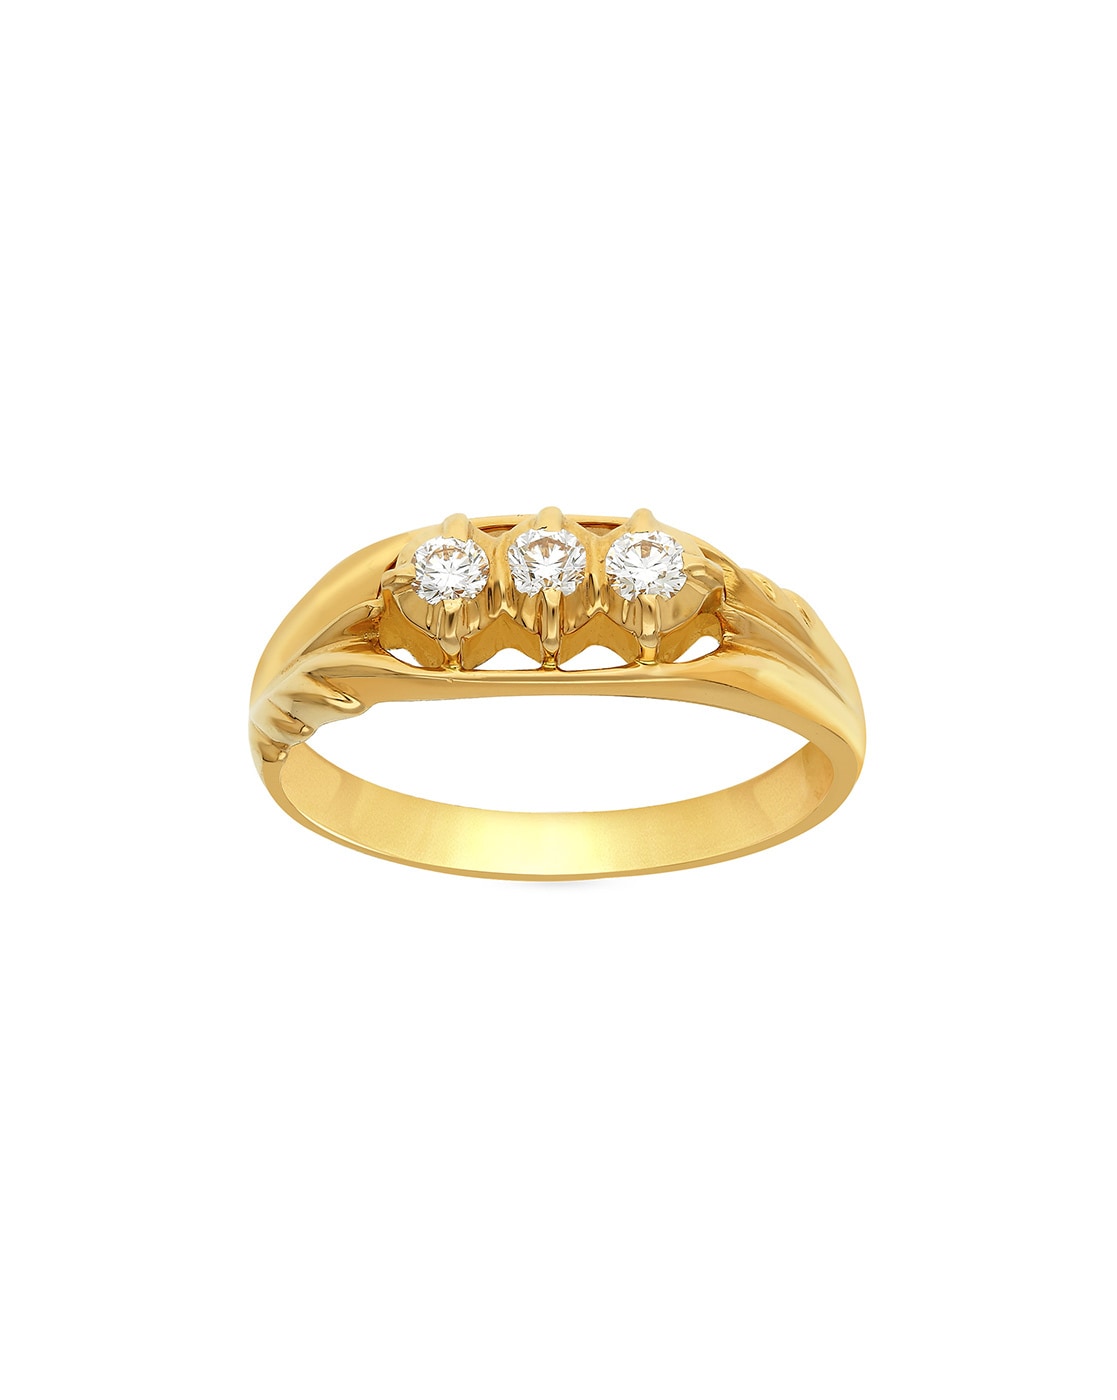 Akash Ganga Jewels Floral Gold Diamond Ring Price in India - Buy Akash  Ganga Jewels Floral Gold Diamond Ring Online at Best Prices in India |  Flipkart.com